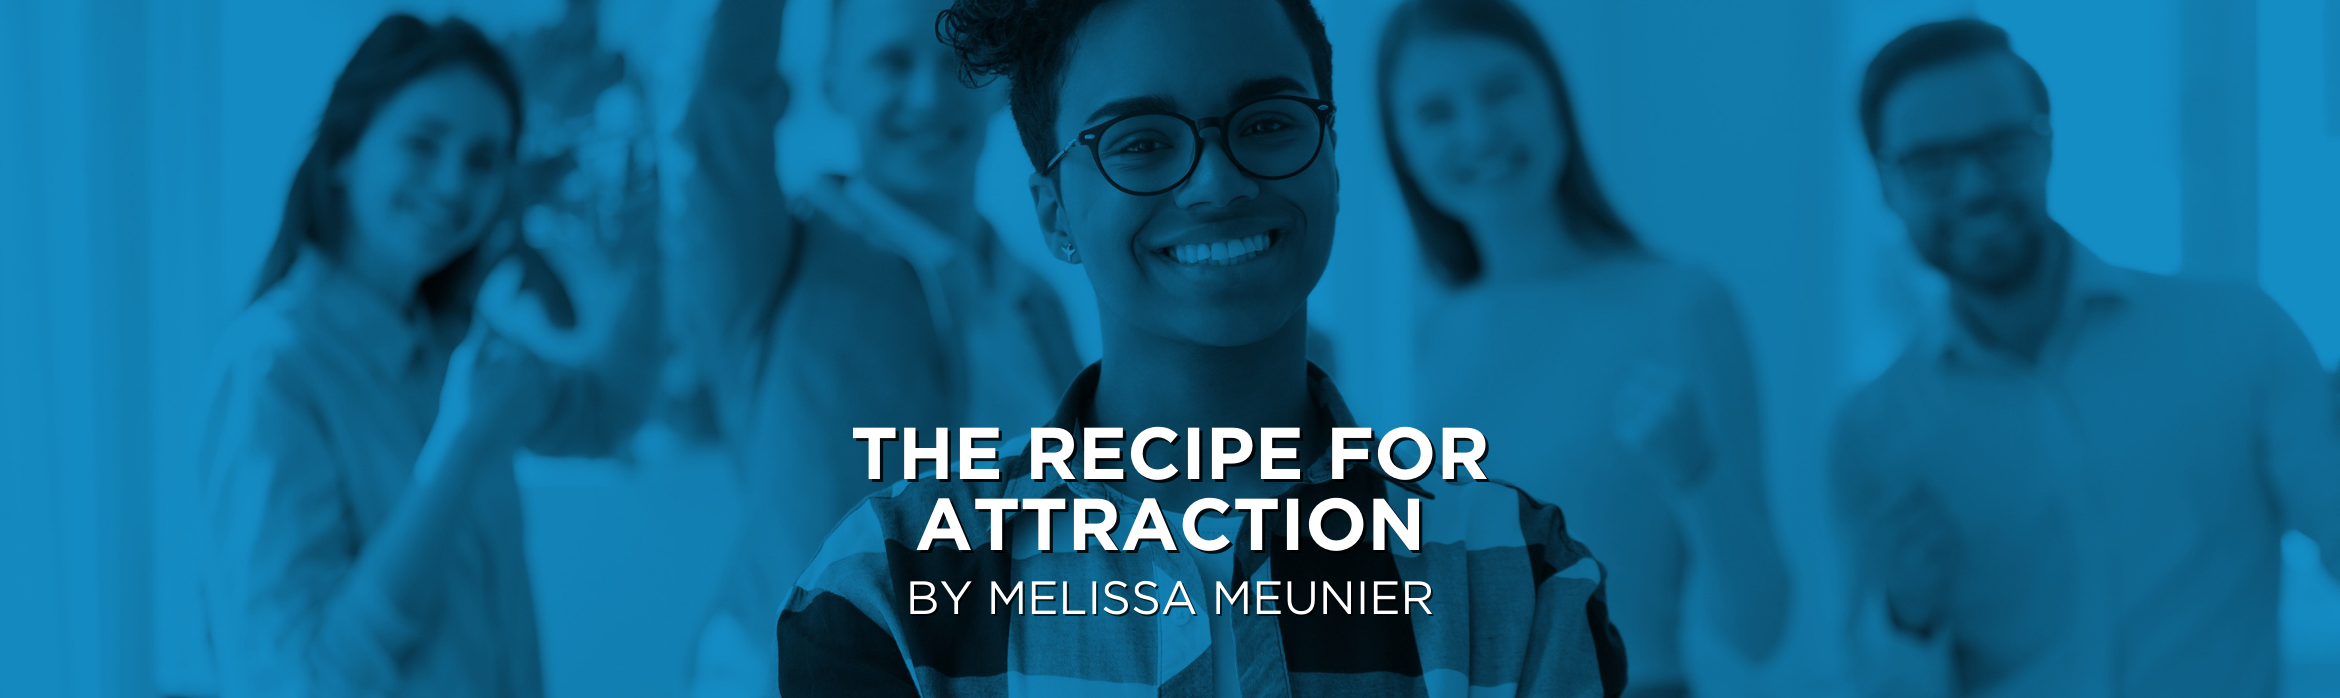 The Recipe for Attraction